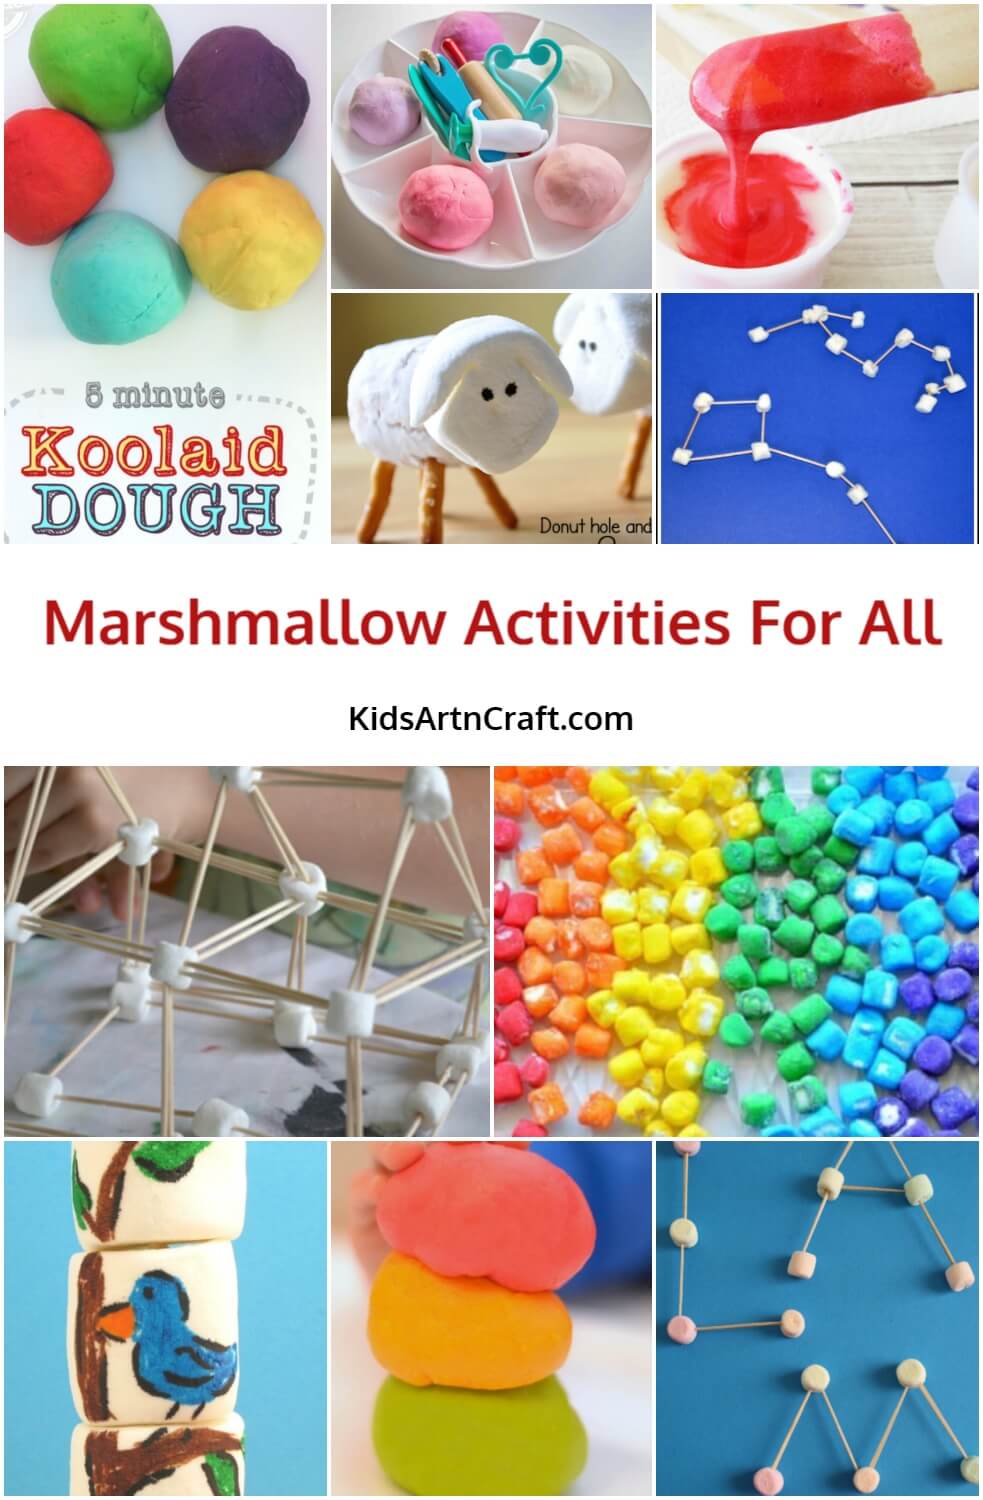 Marshmallow Activities For All